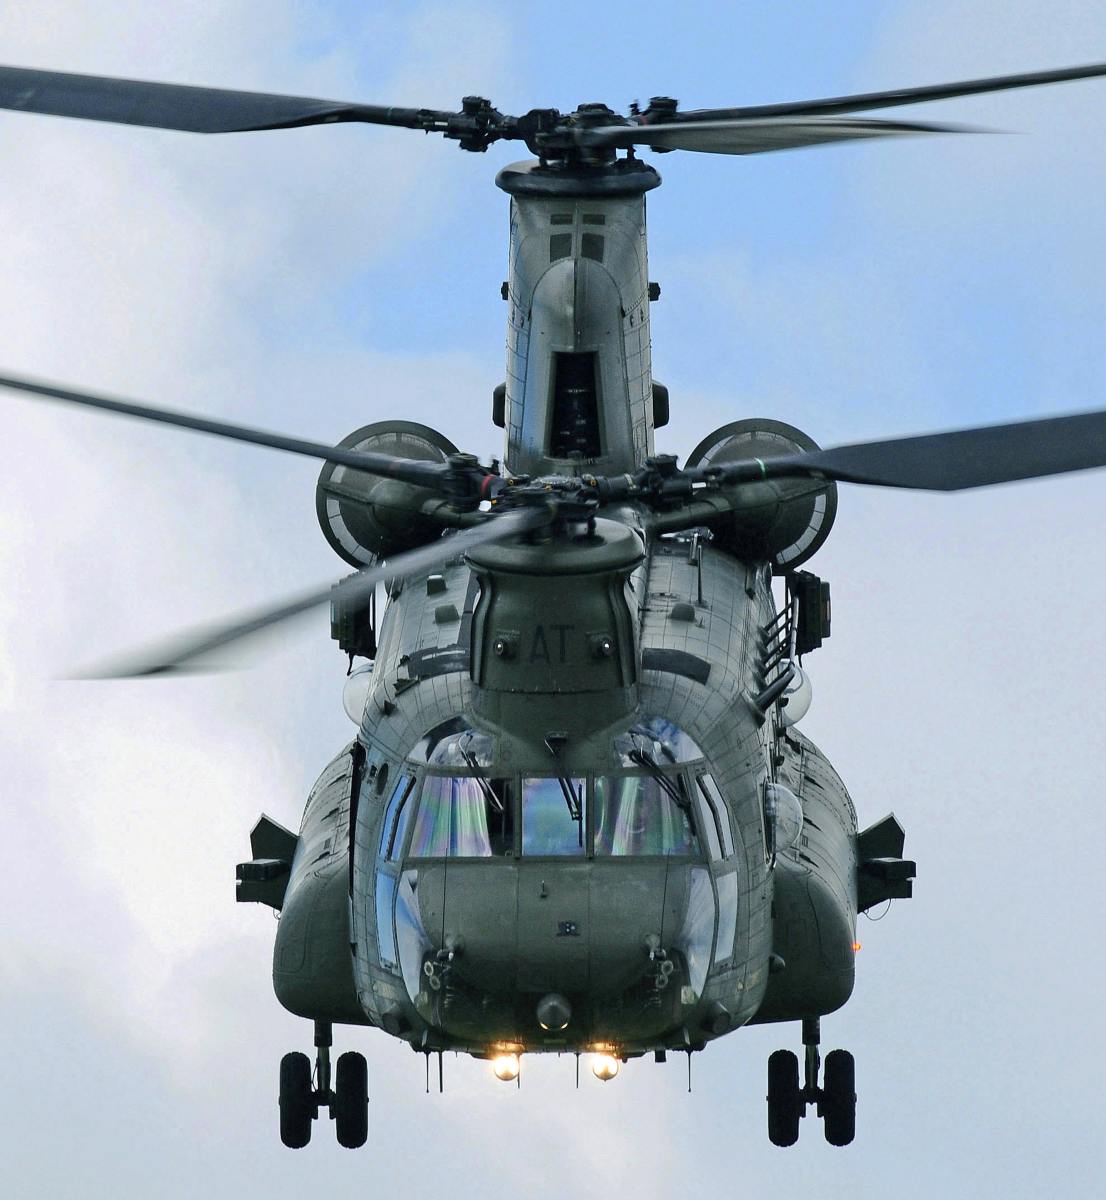 The 7 Fastest Military Attack Helicopters in the World